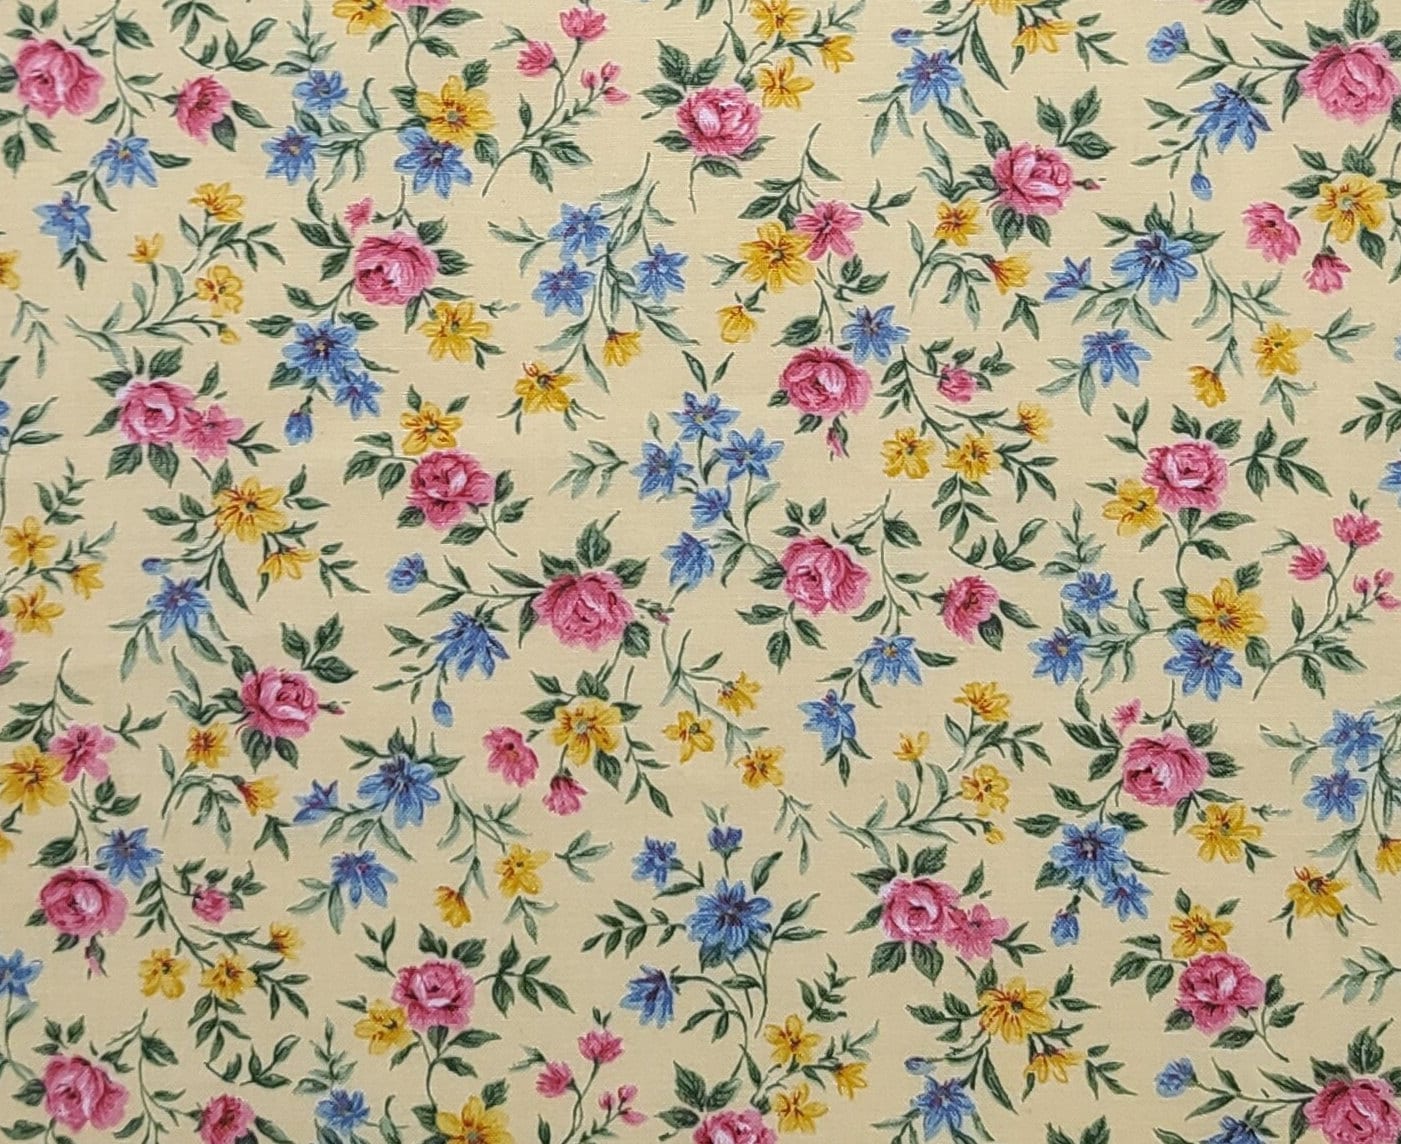 1997 Classic Cotton - Soft Yellow Fabric / Pink, Blue, Yellow, Green Scattered Flower Print